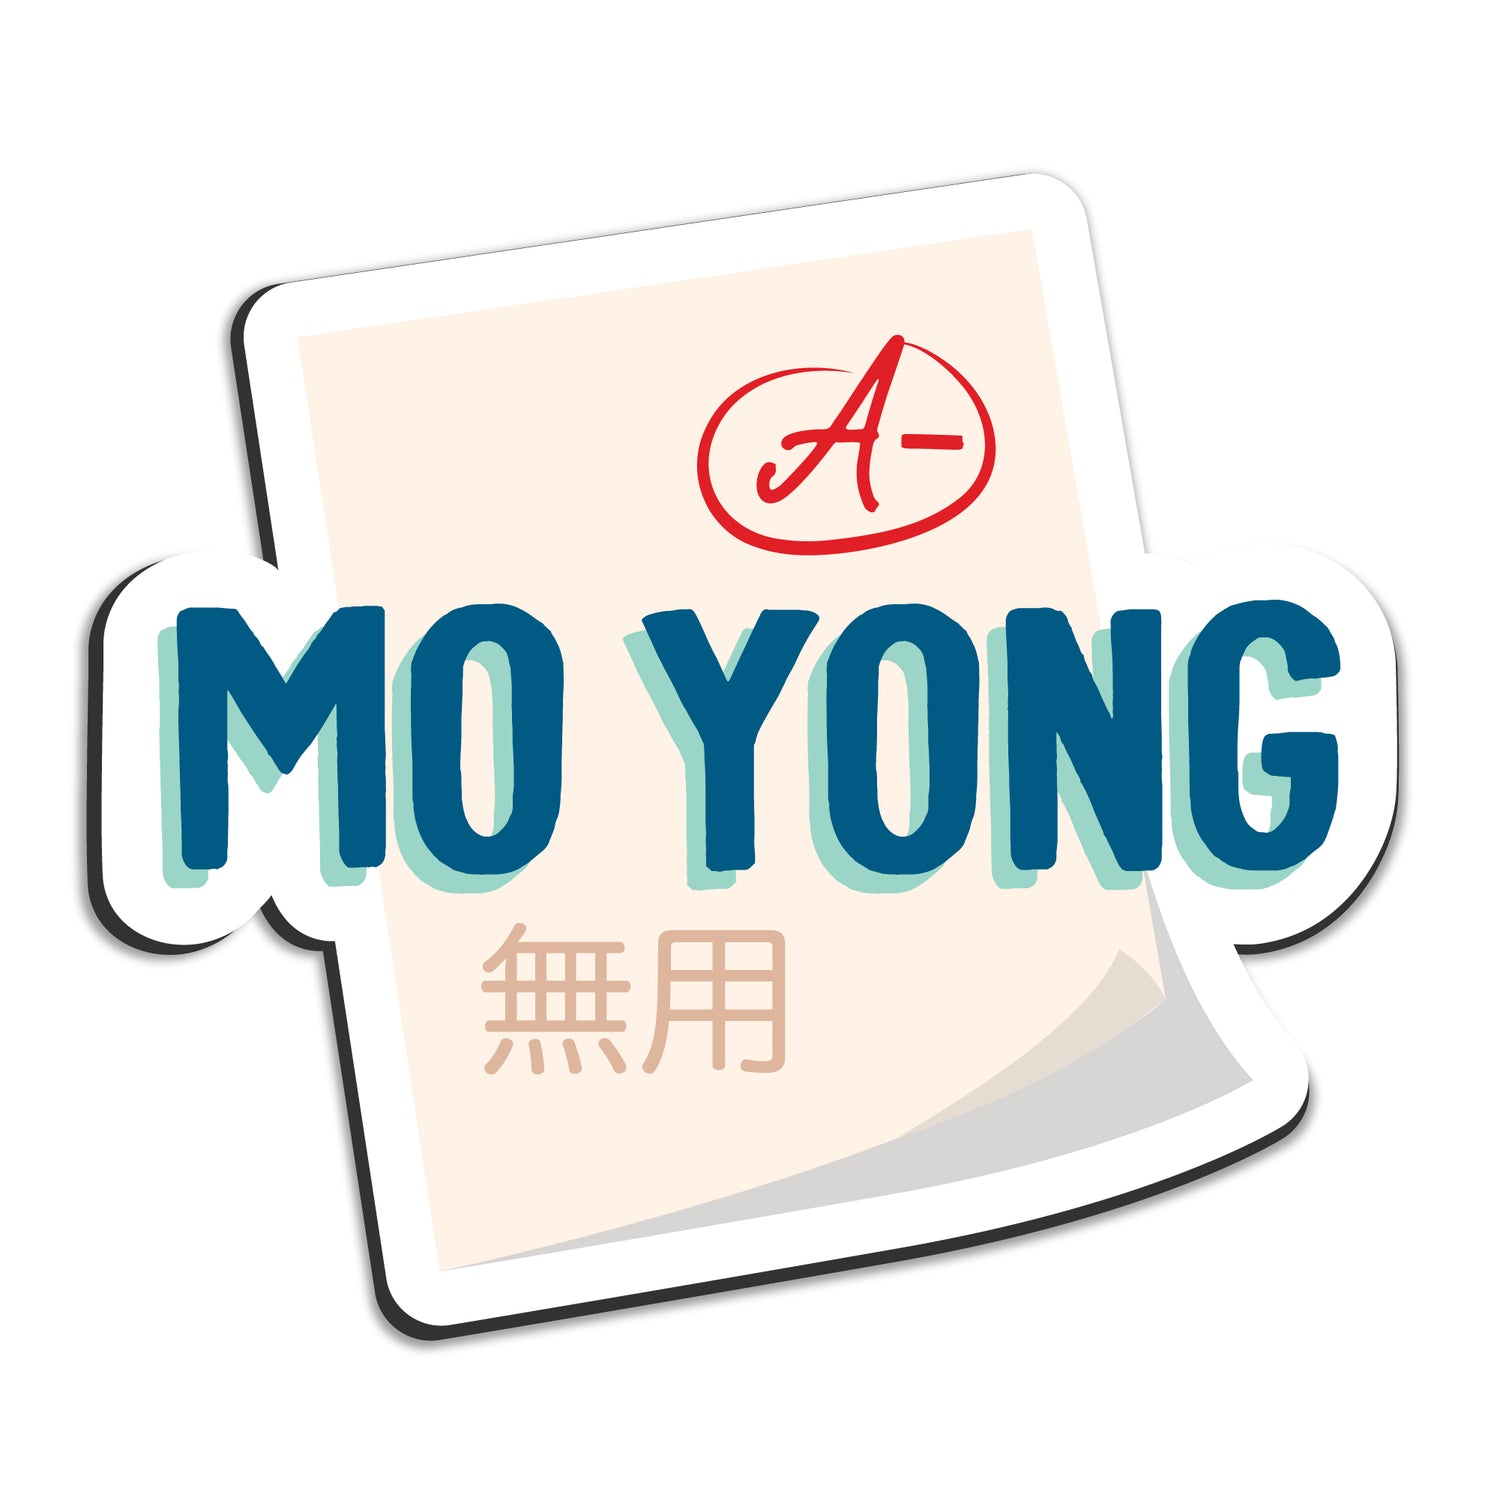 Mo yong magnet by I&